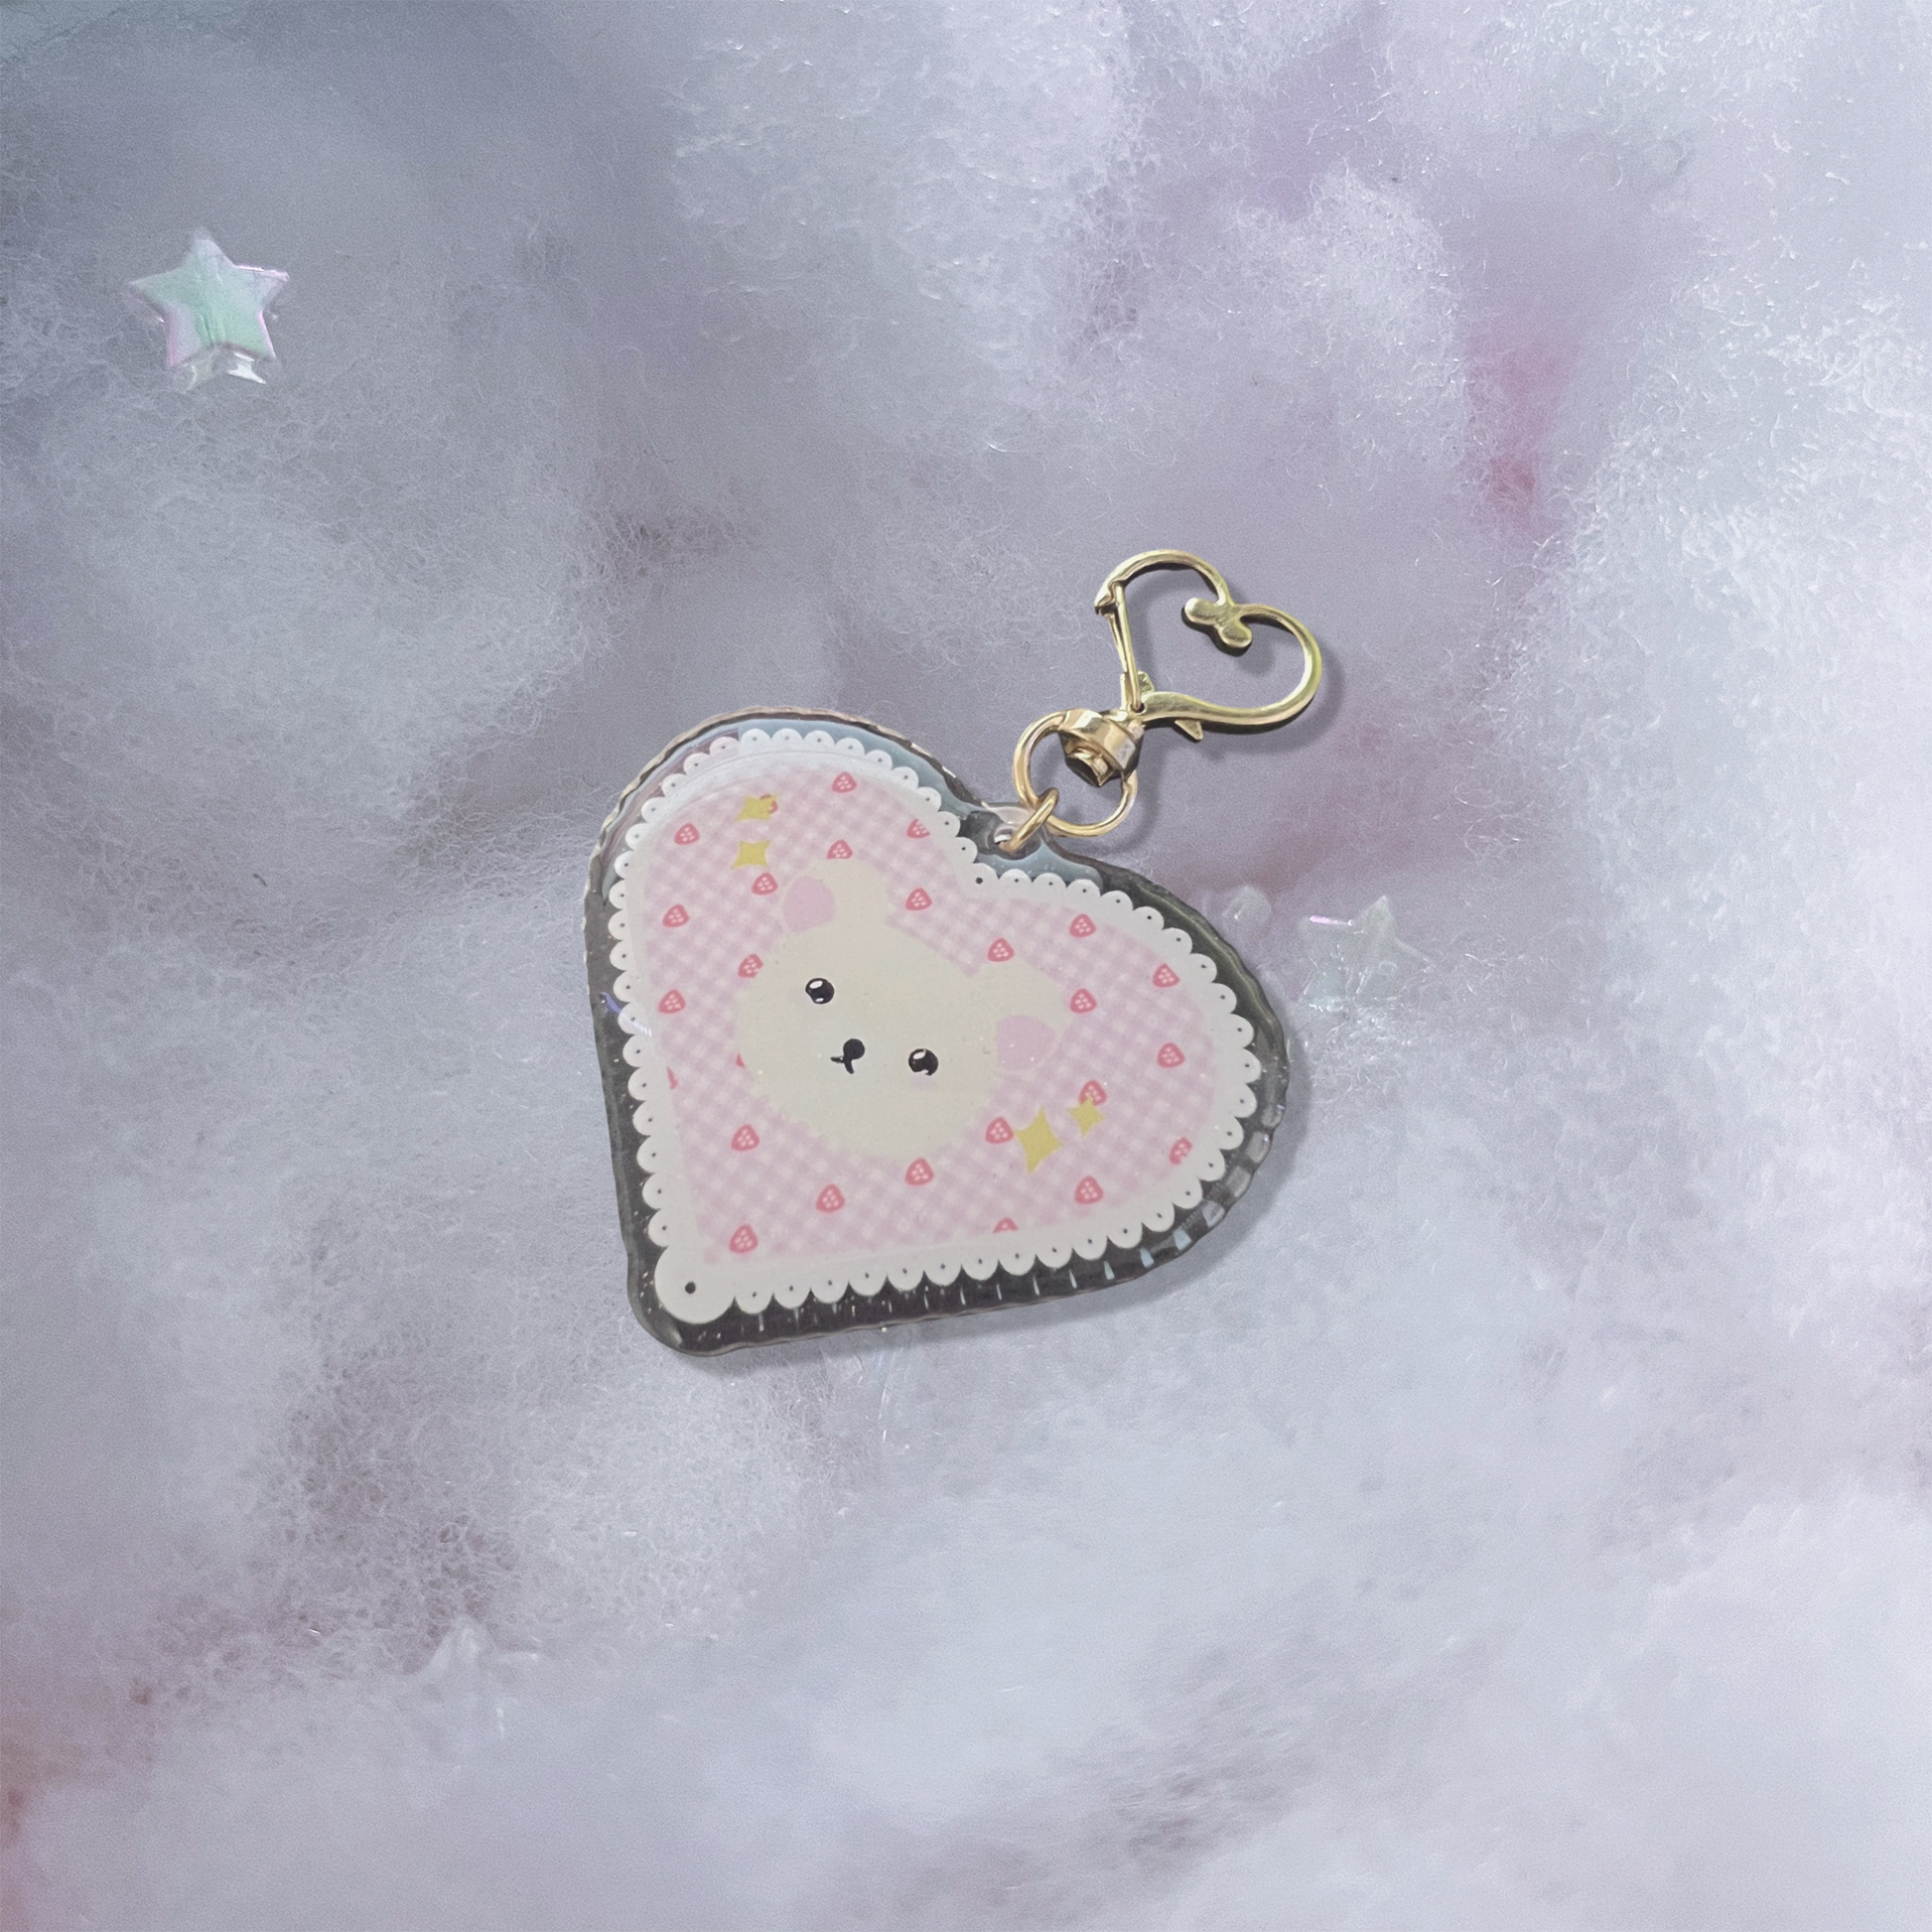 White bear acrylic keychain with micro-glitter finish and gold hearthook.